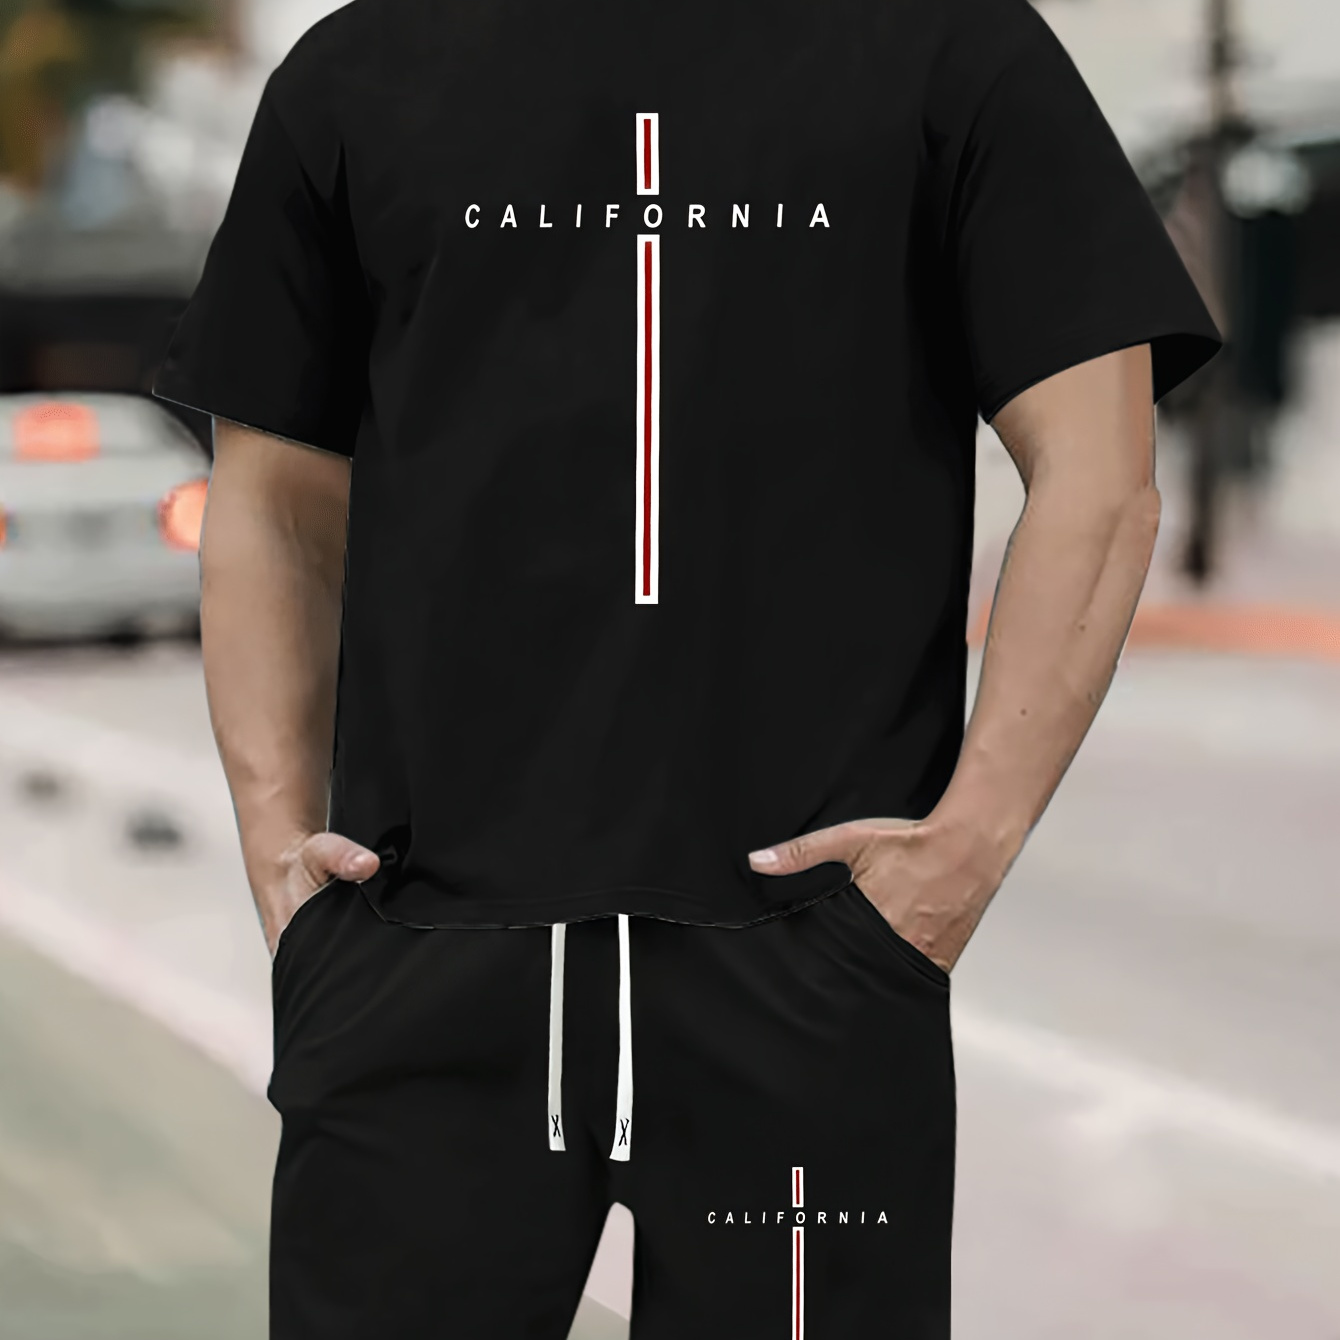 

California Letter Print Men's 2 Piece Set, Short Sleeve T-shirt & Drawstring Shorts, Summer Trendy Casual Versatile Sweatsuits For Daily Outdoor Sports